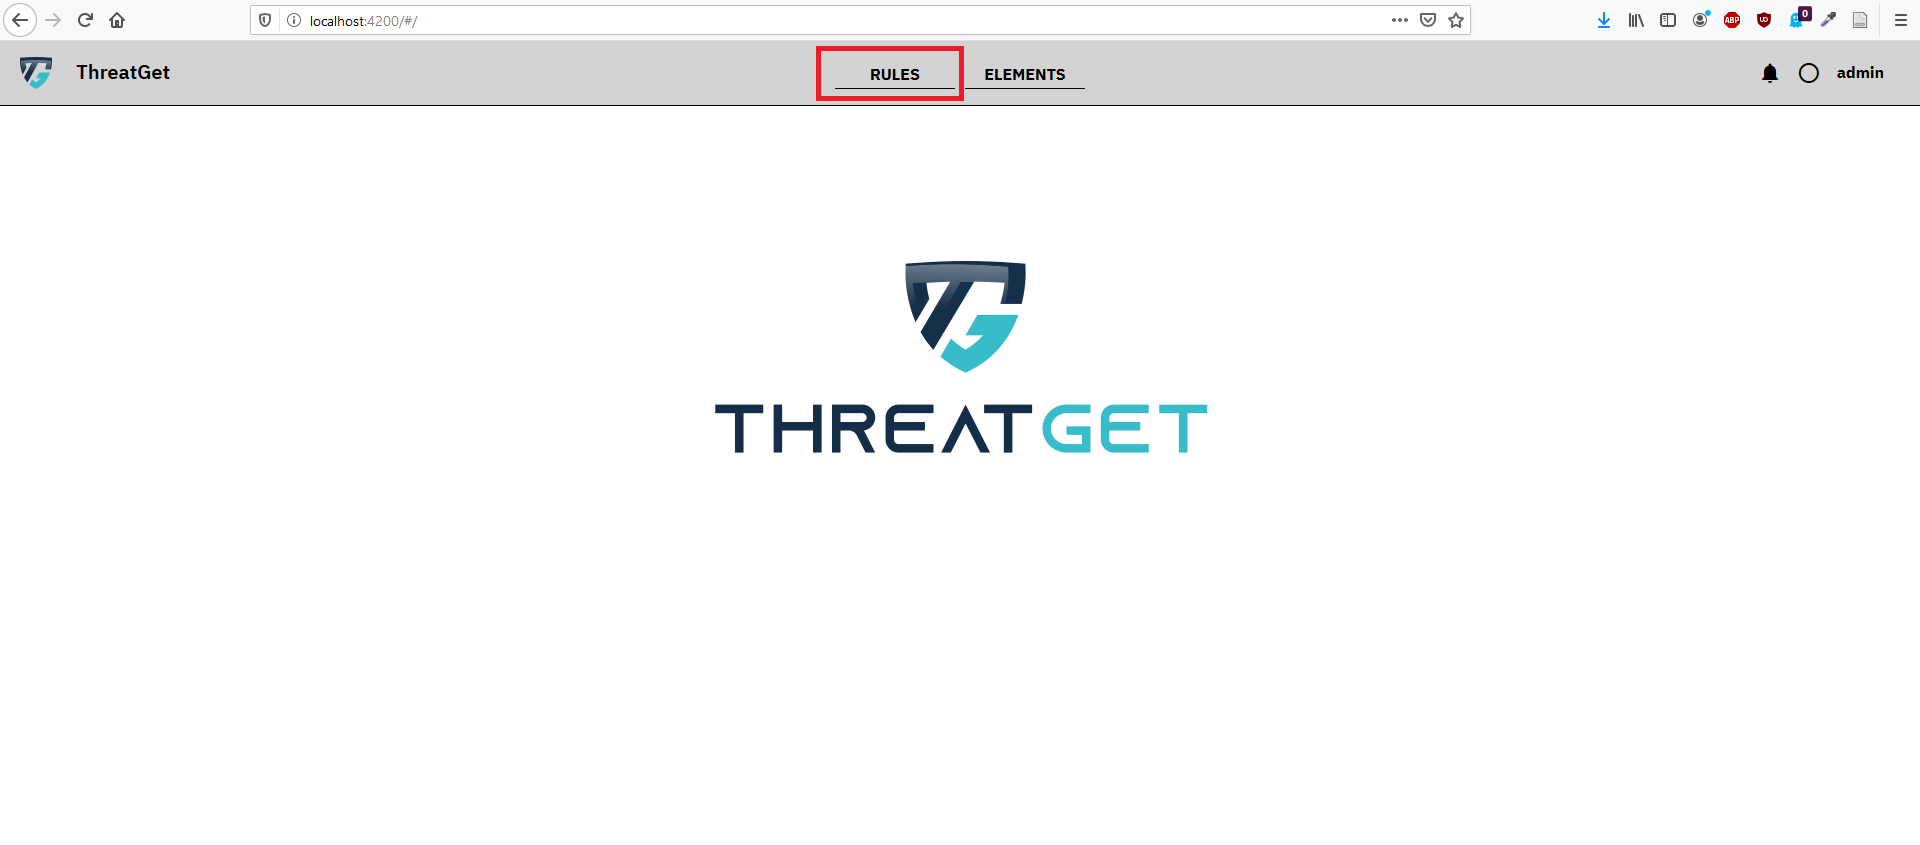 ThreatGet overview screen rules button marked